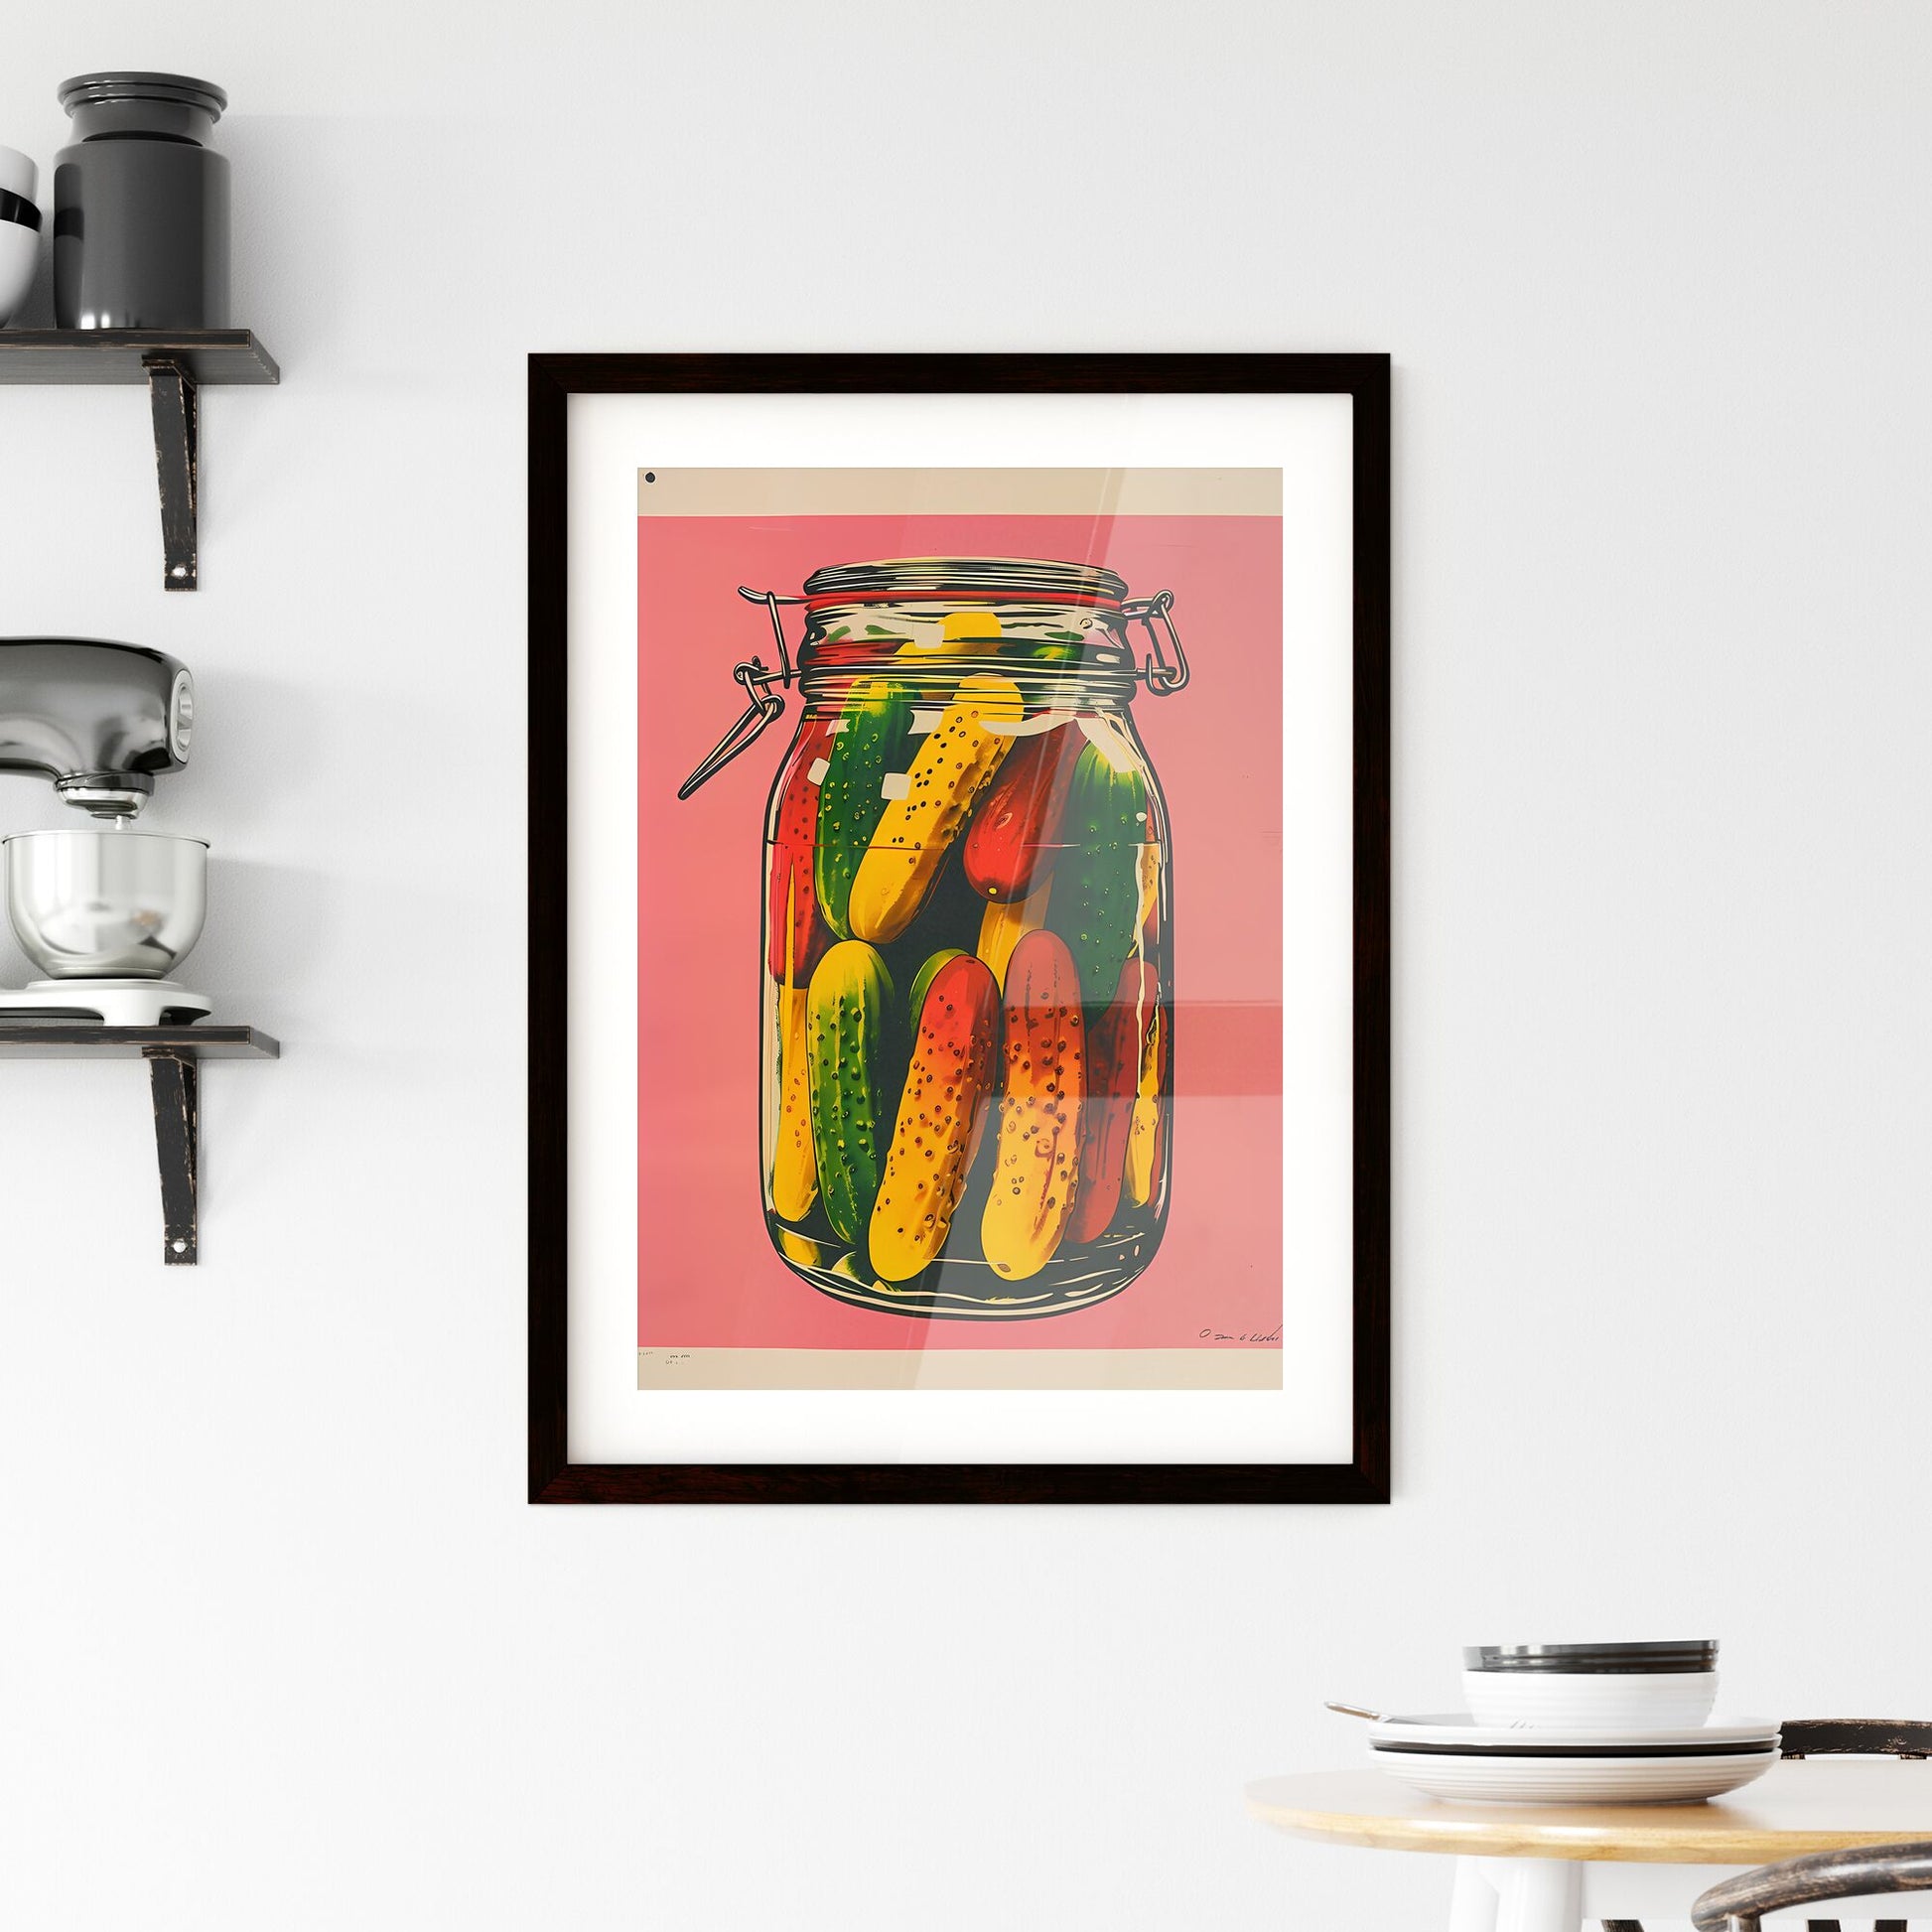 Colorful Woodcut Poster of Pickles in Glass Jar on Pink, Simple Playful Composition, High-Resolution Still Life Art Print Default Title